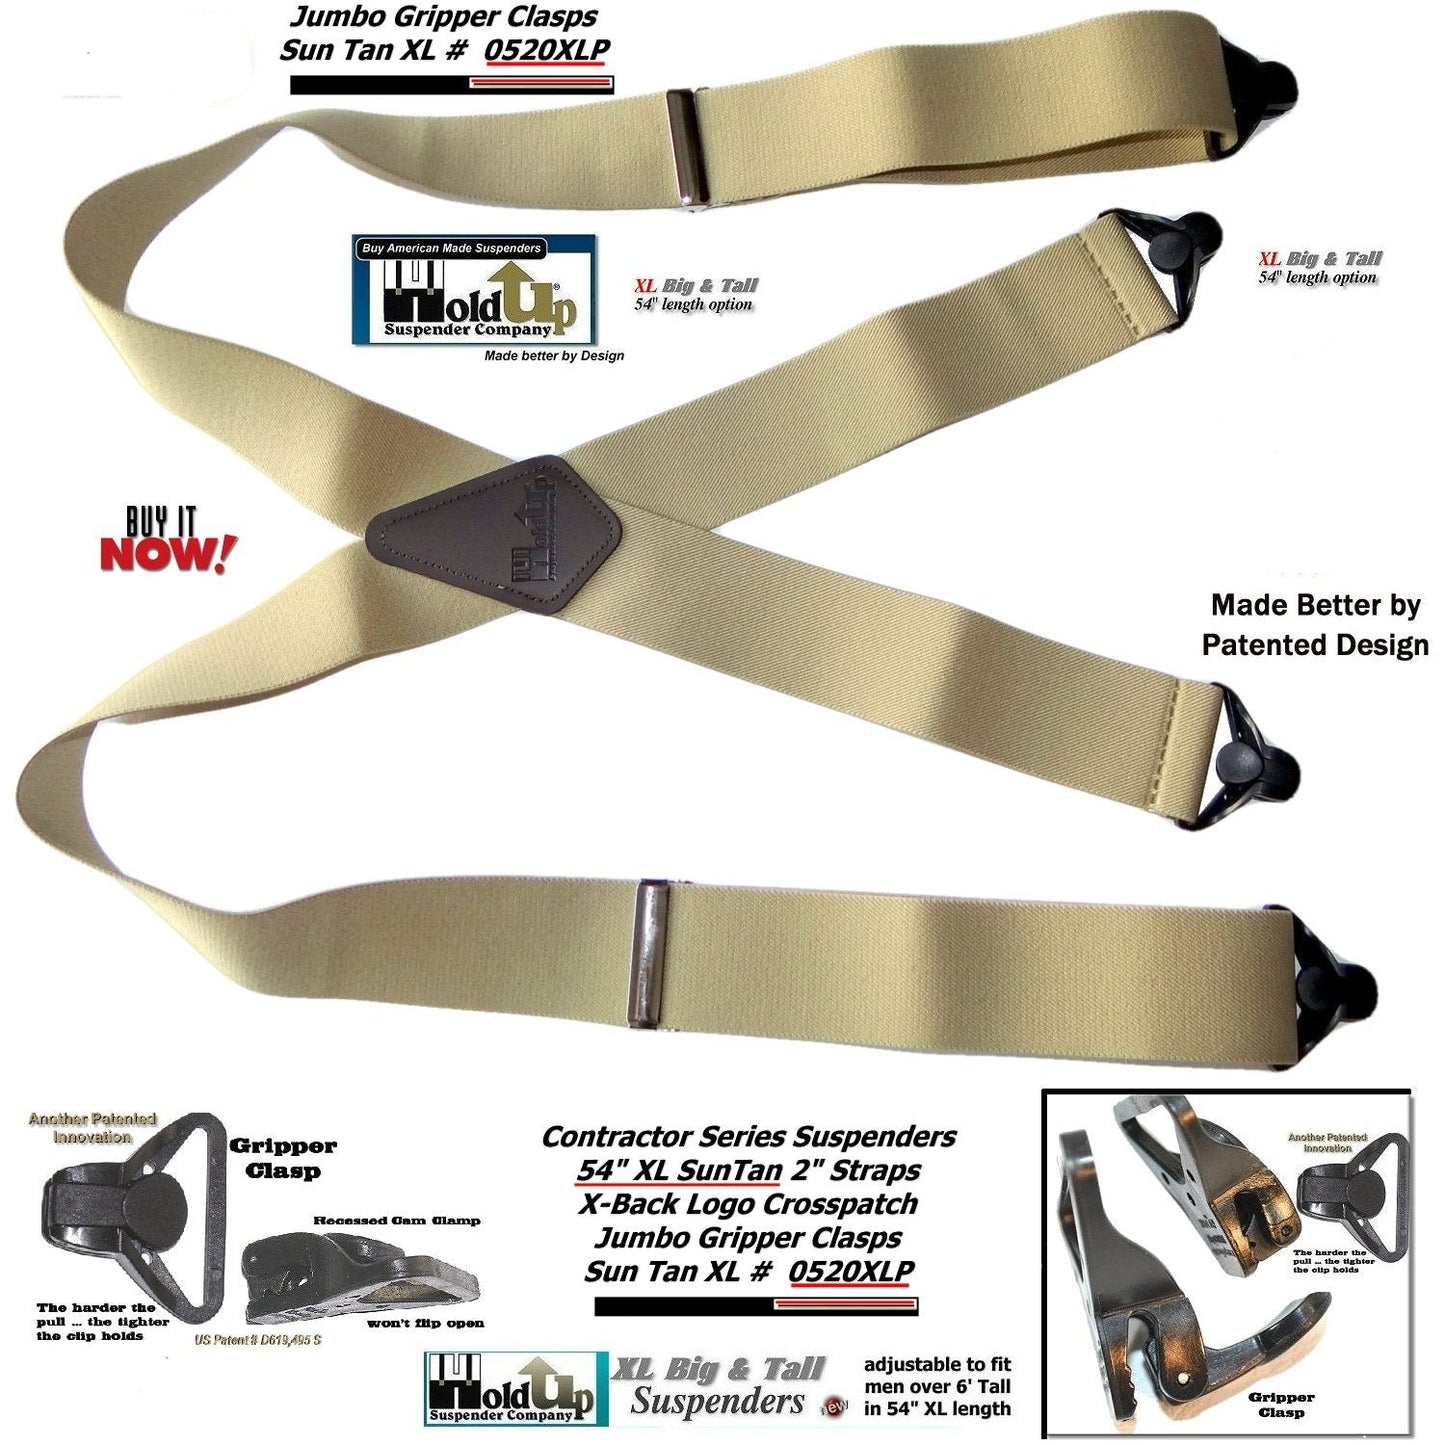 Holdup Suspender Company's Extra Long XL Light Tan Suspenders are 2 inches wide with USA Patented black Jumbo Gripper Clasps